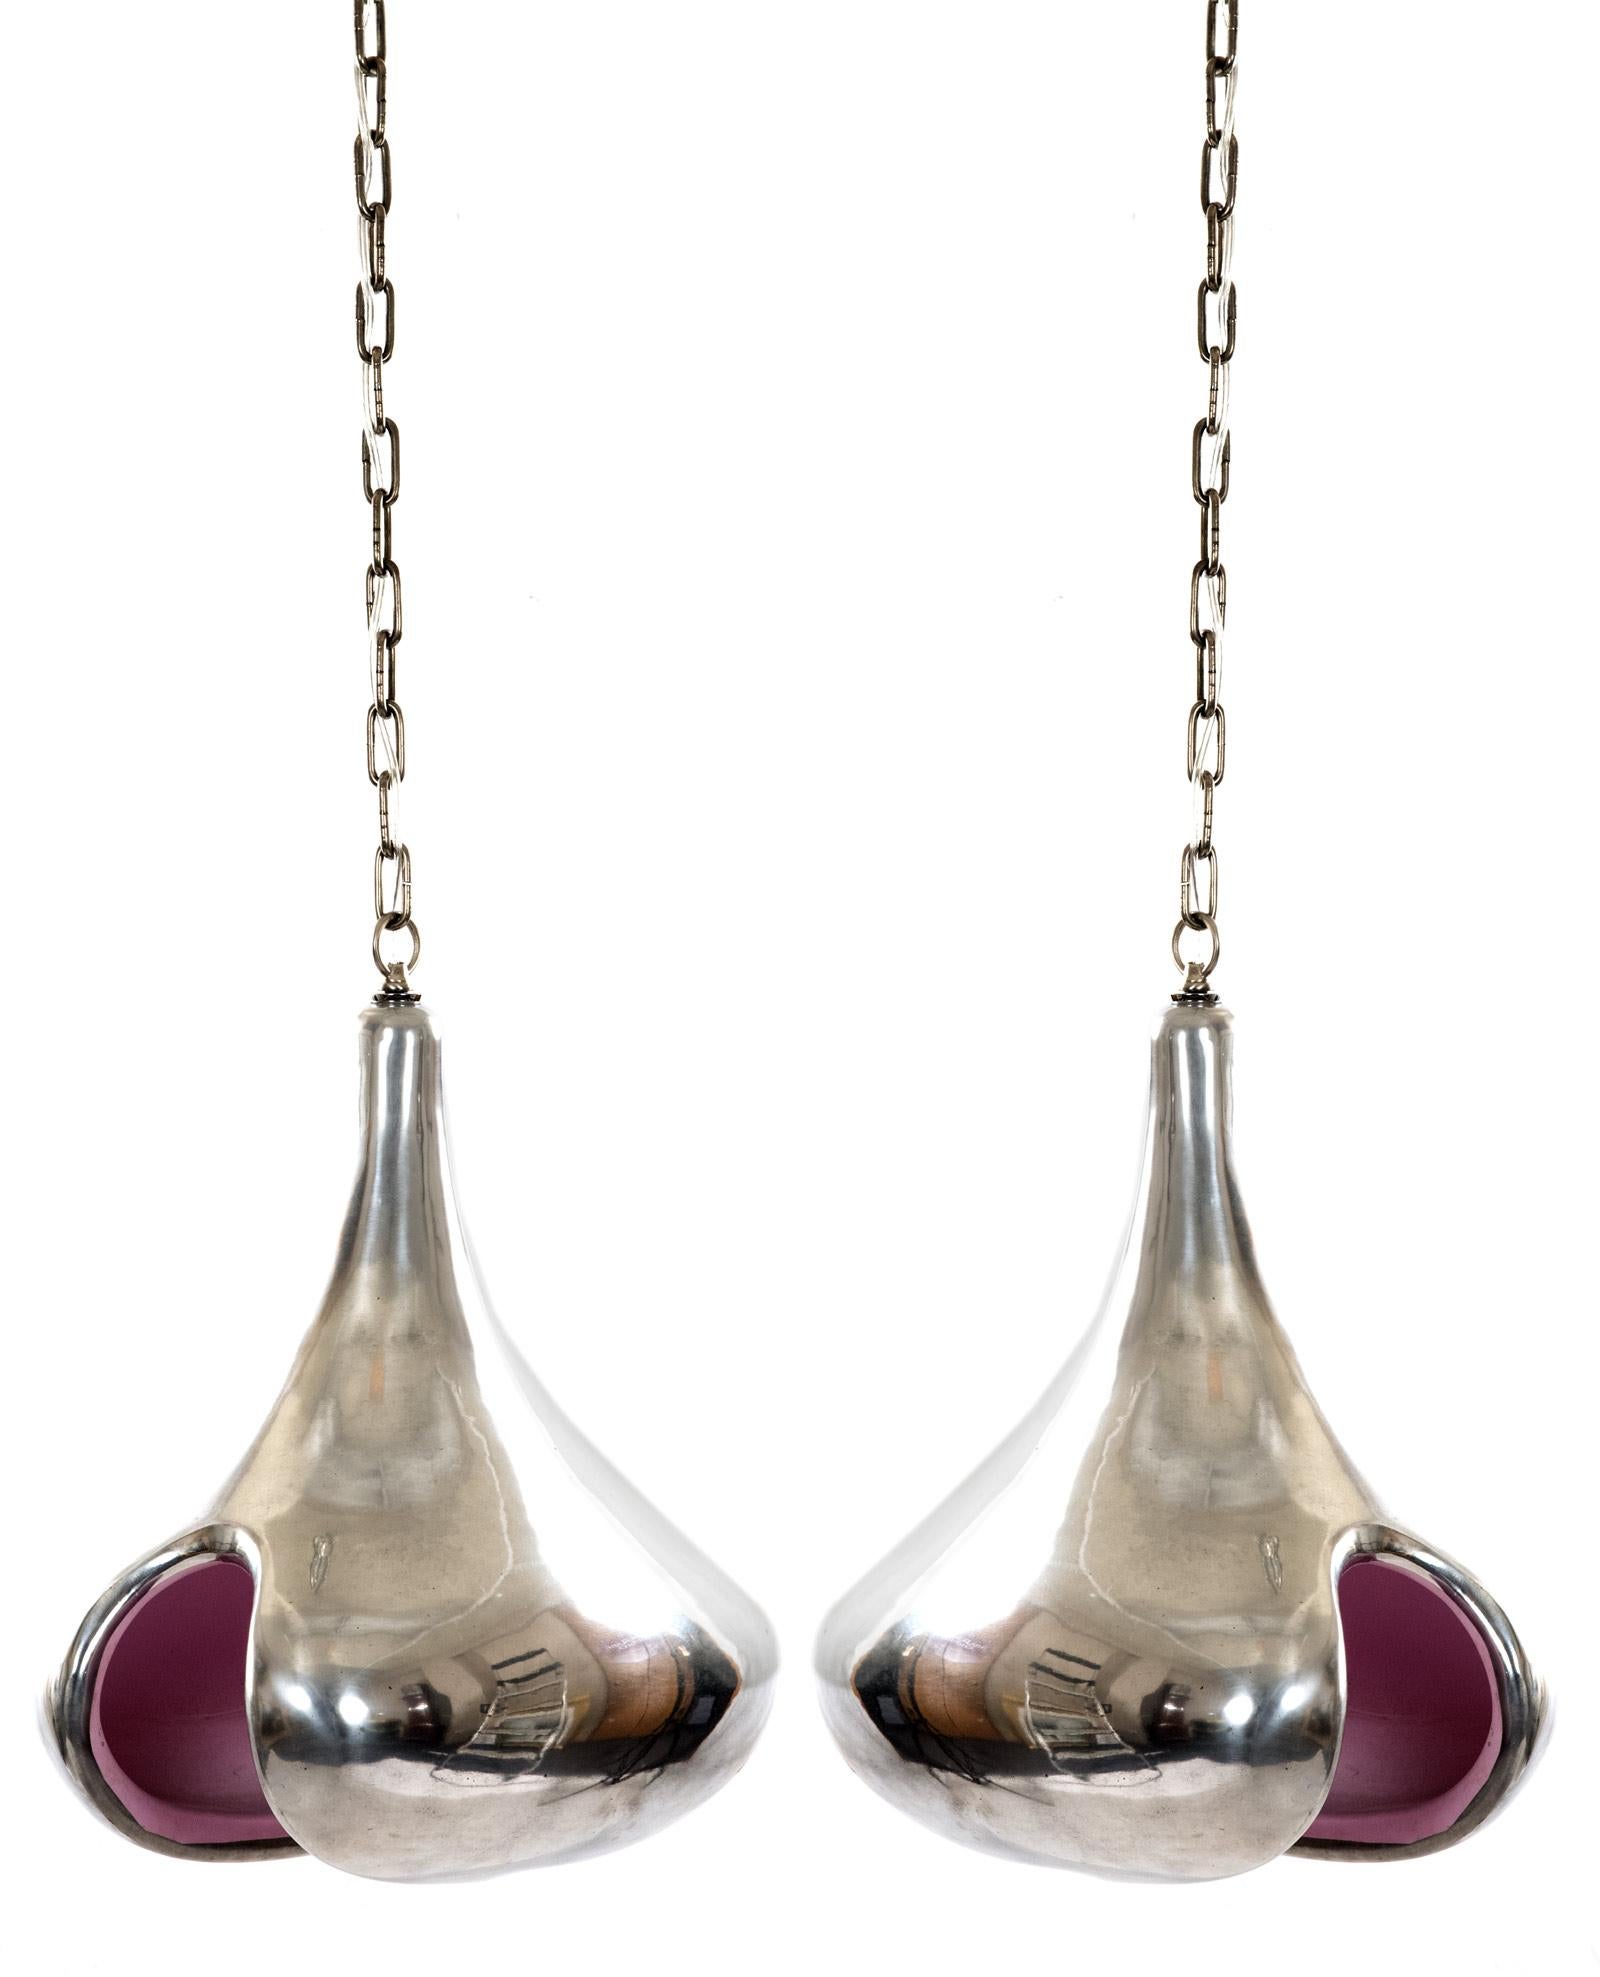 A pair of Art Moderne cast aluminum pendant lights of tear drop form, the silhouette having an open central space with a juxtaposing pink interior, with a chain suspension. Measures: 21 x 13 x 17 inches (not including the chain).